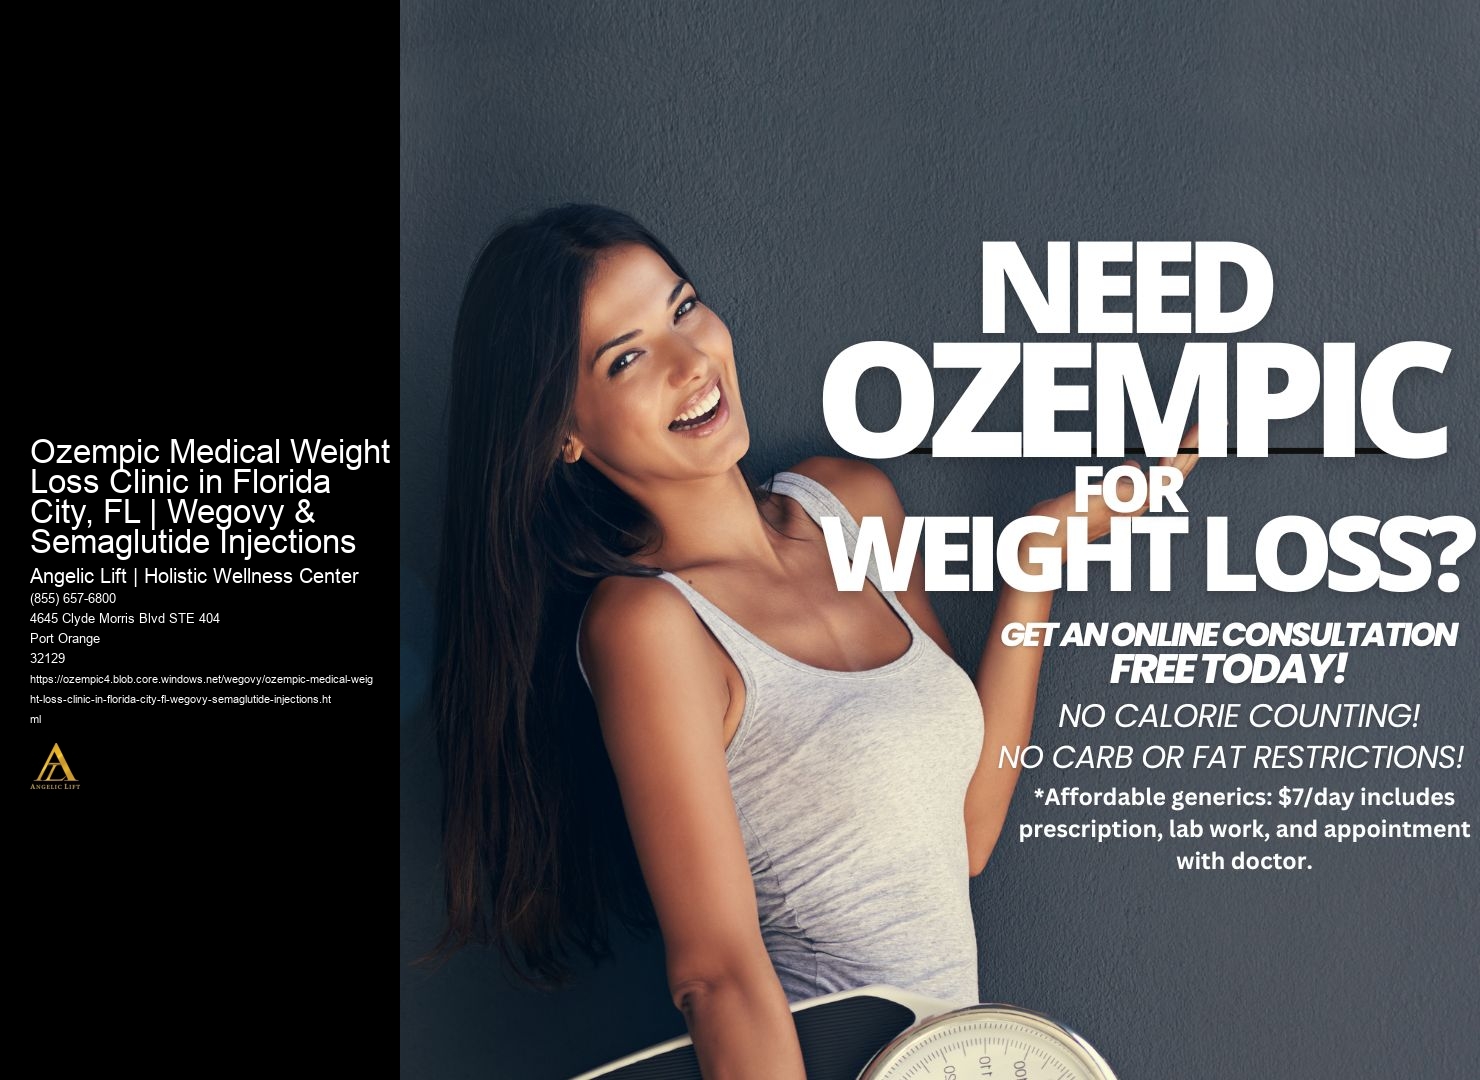 Ozempic Medical Weight Loss Clinic in Florida City, FL | Wegovy & Semaglutide Injections